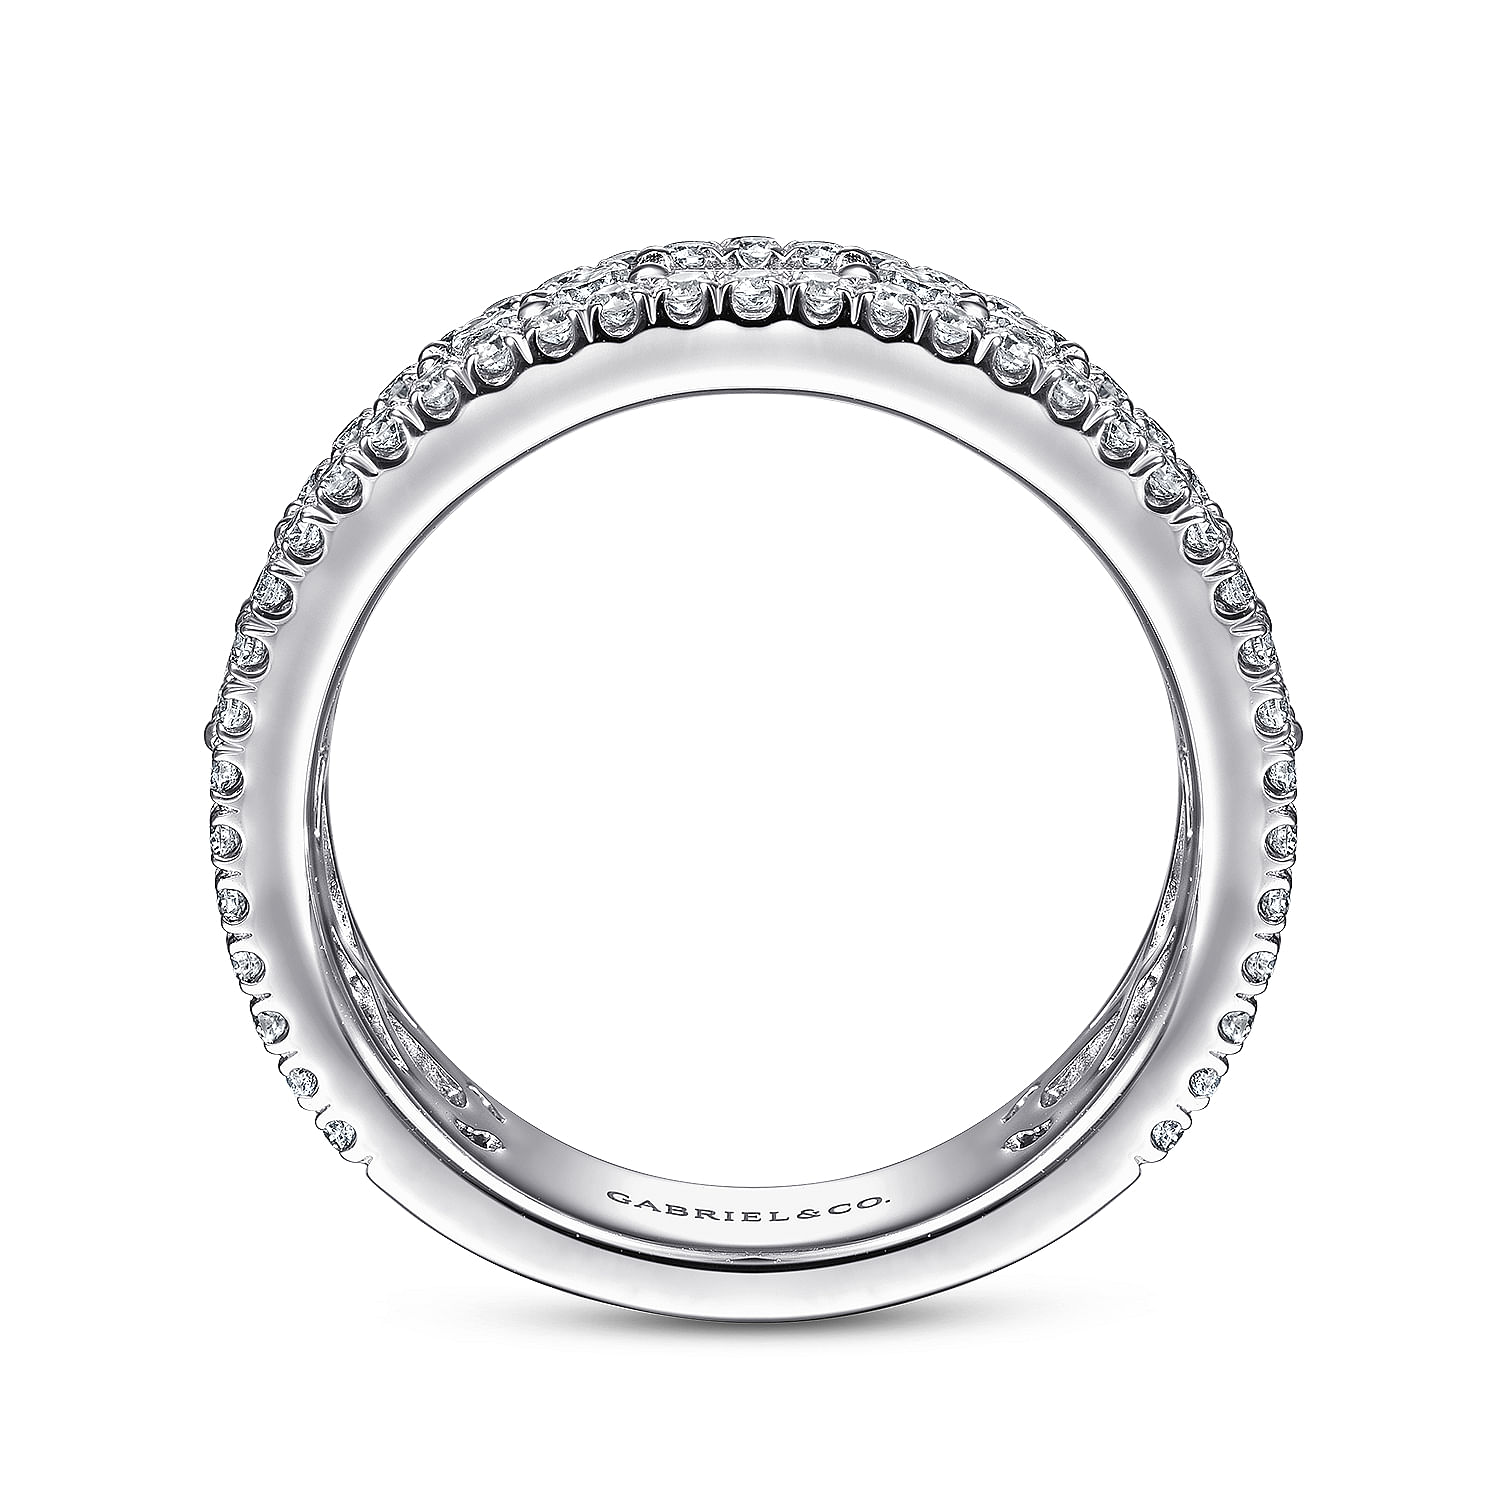 Wide Platinum Round and Baguette Diamond Anniversary Band